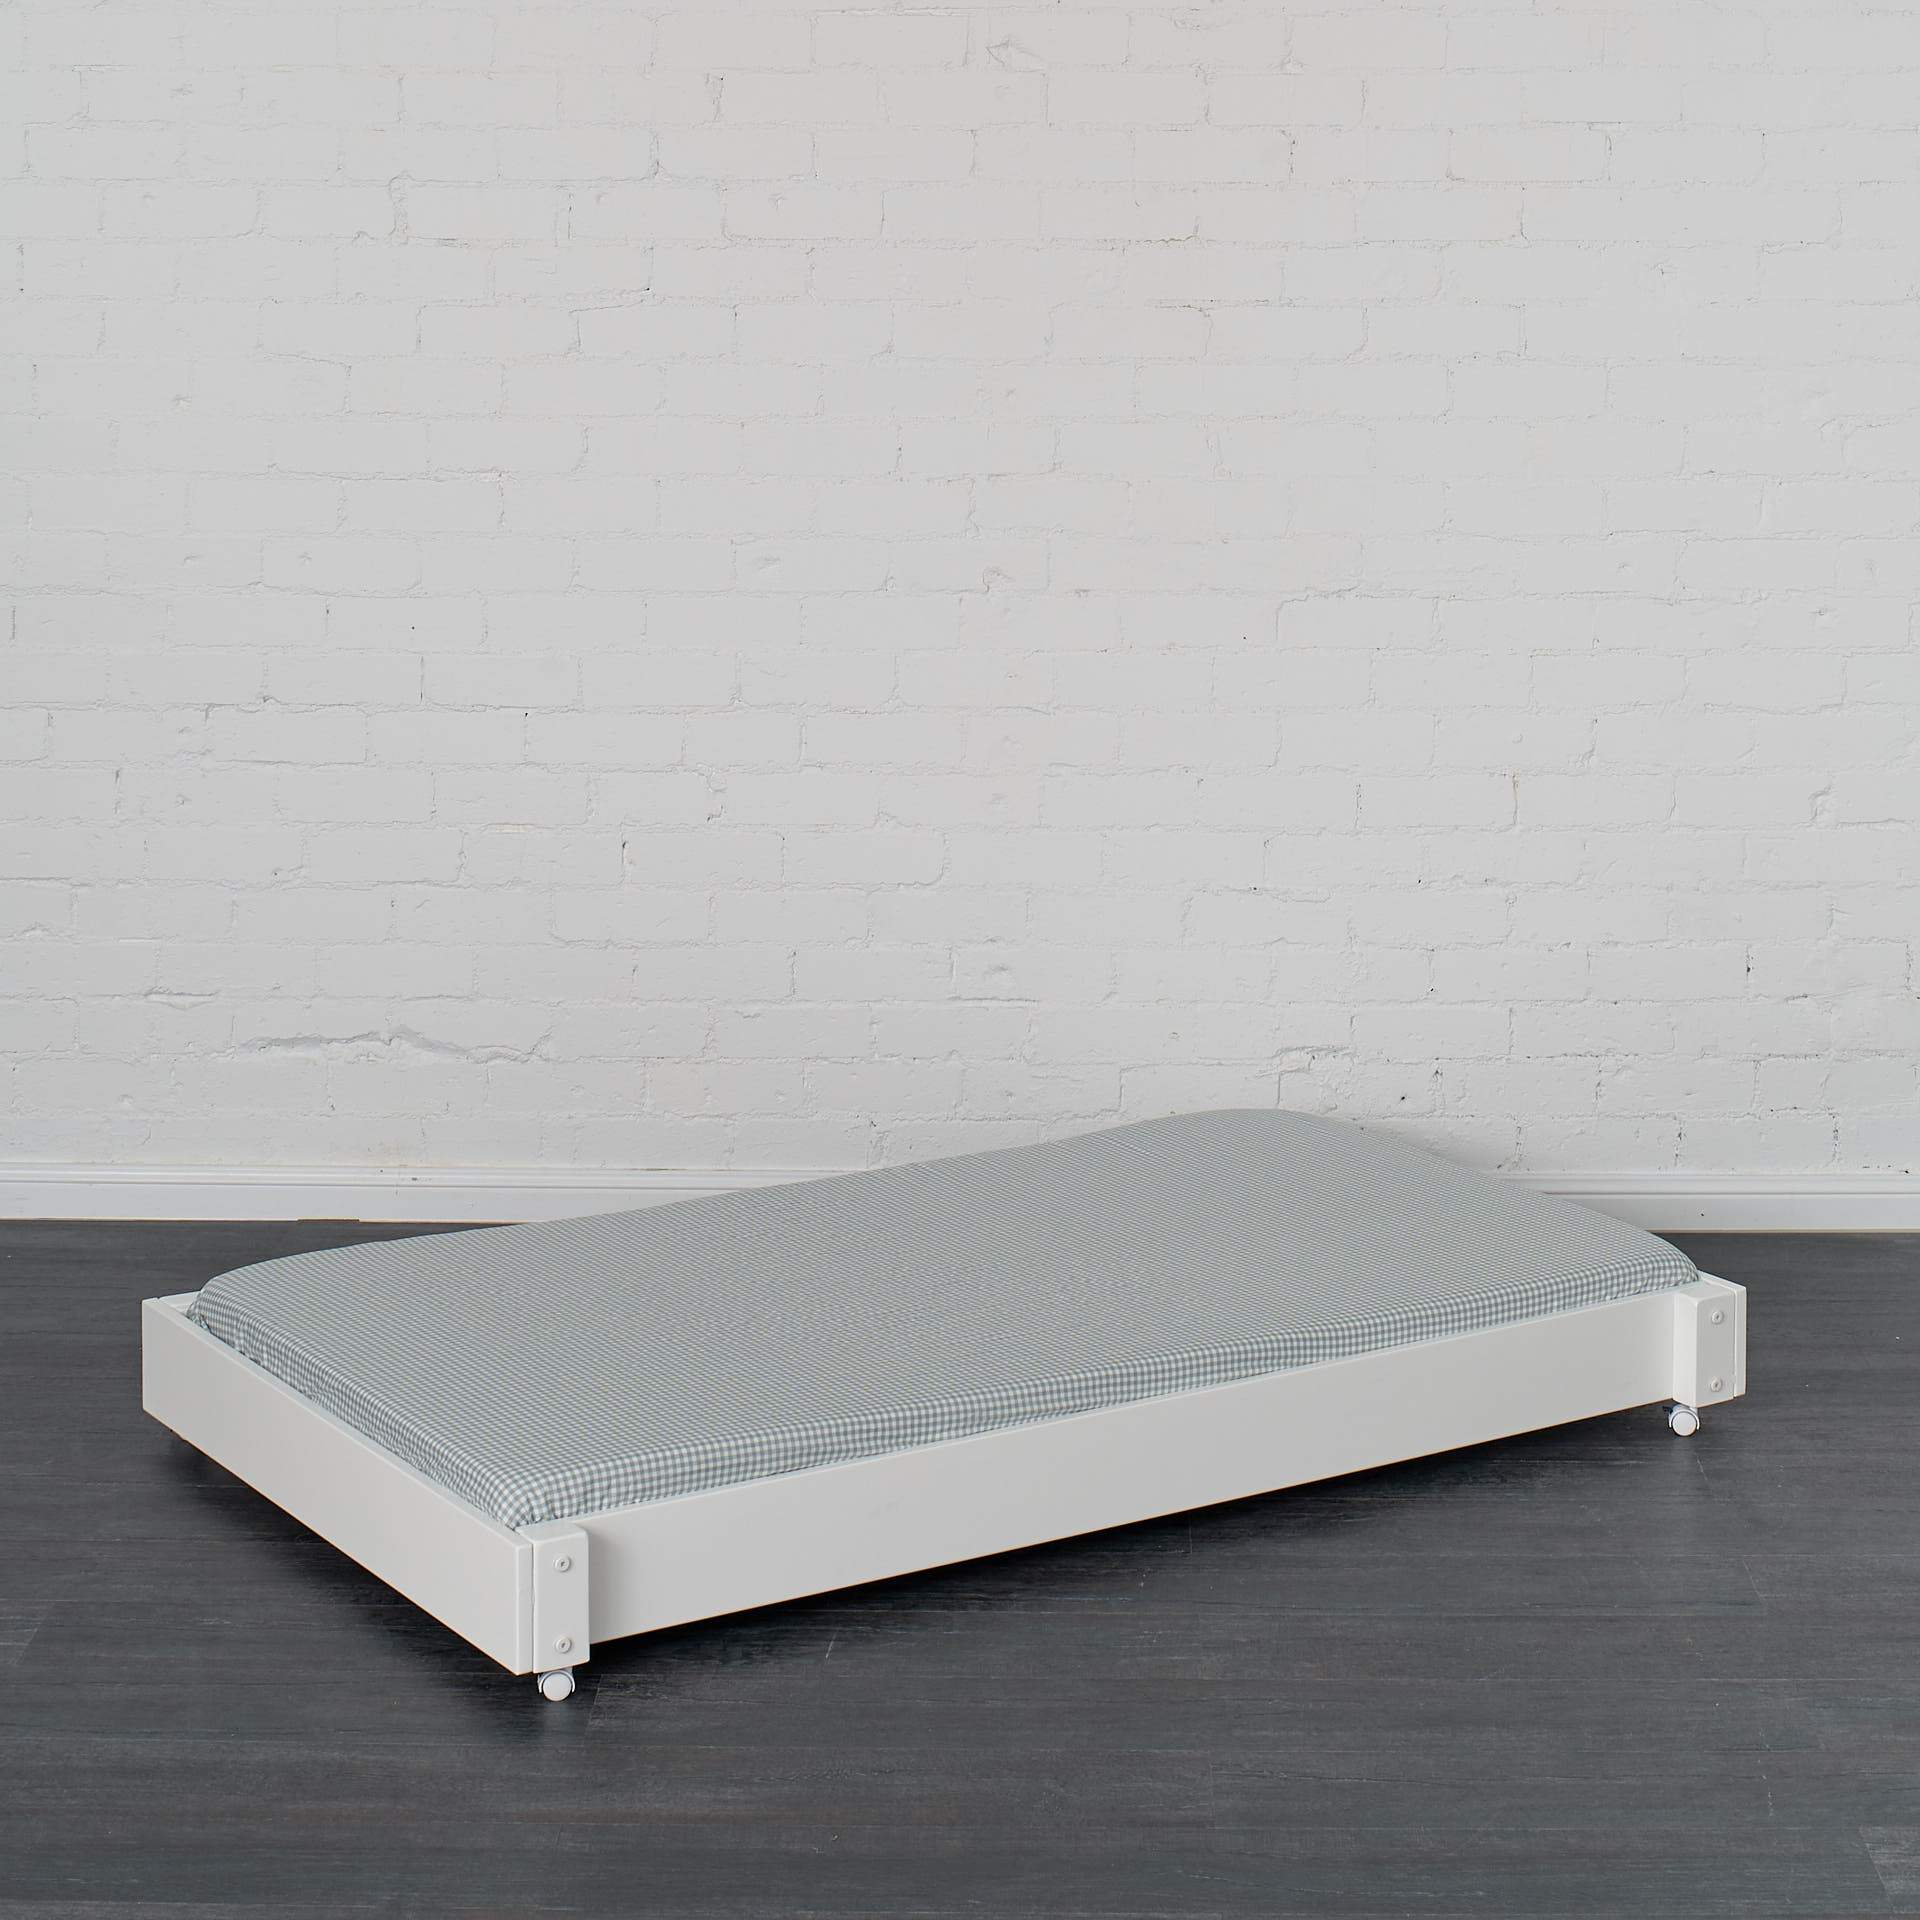 Trundle bed pictured in white finish with trundle mattress